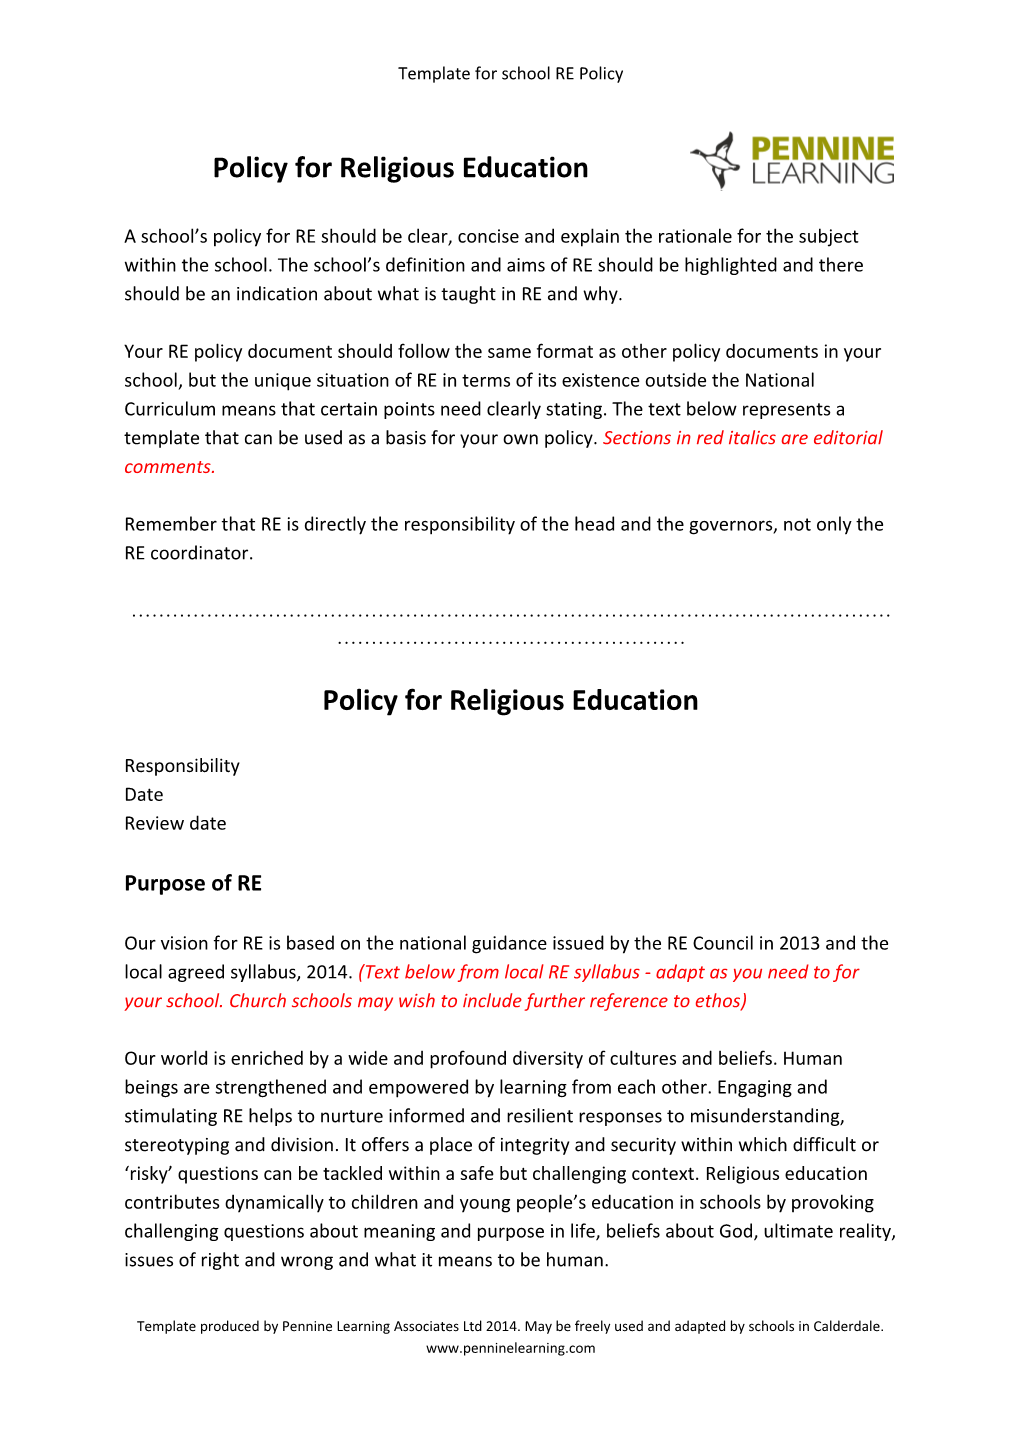 Template for School RE Policy